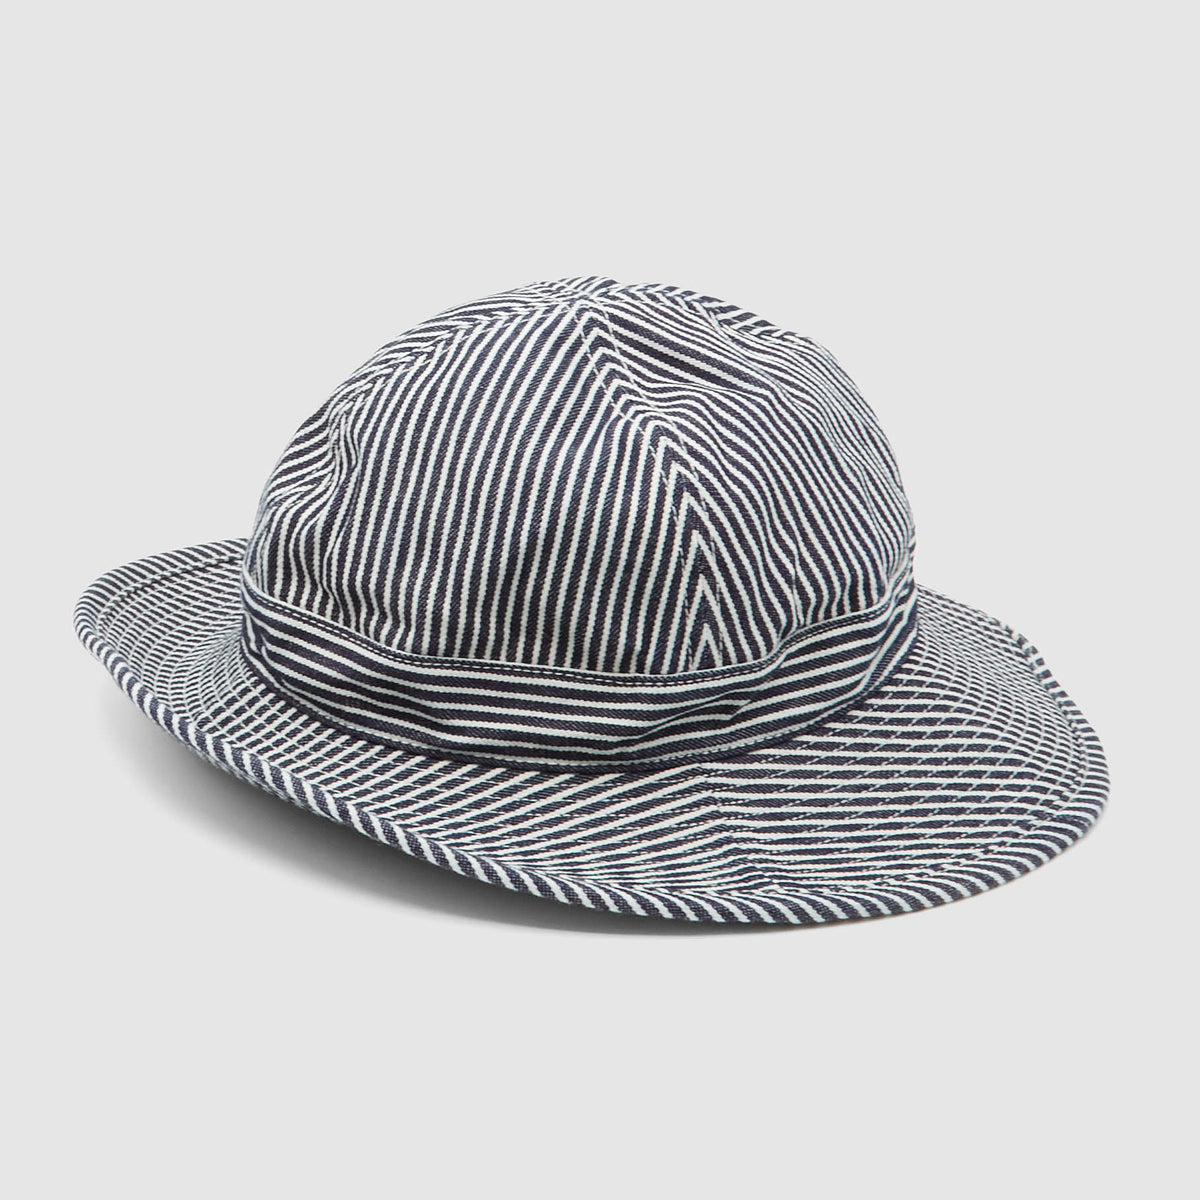 OrSlow US Naval Style Bucket Hat